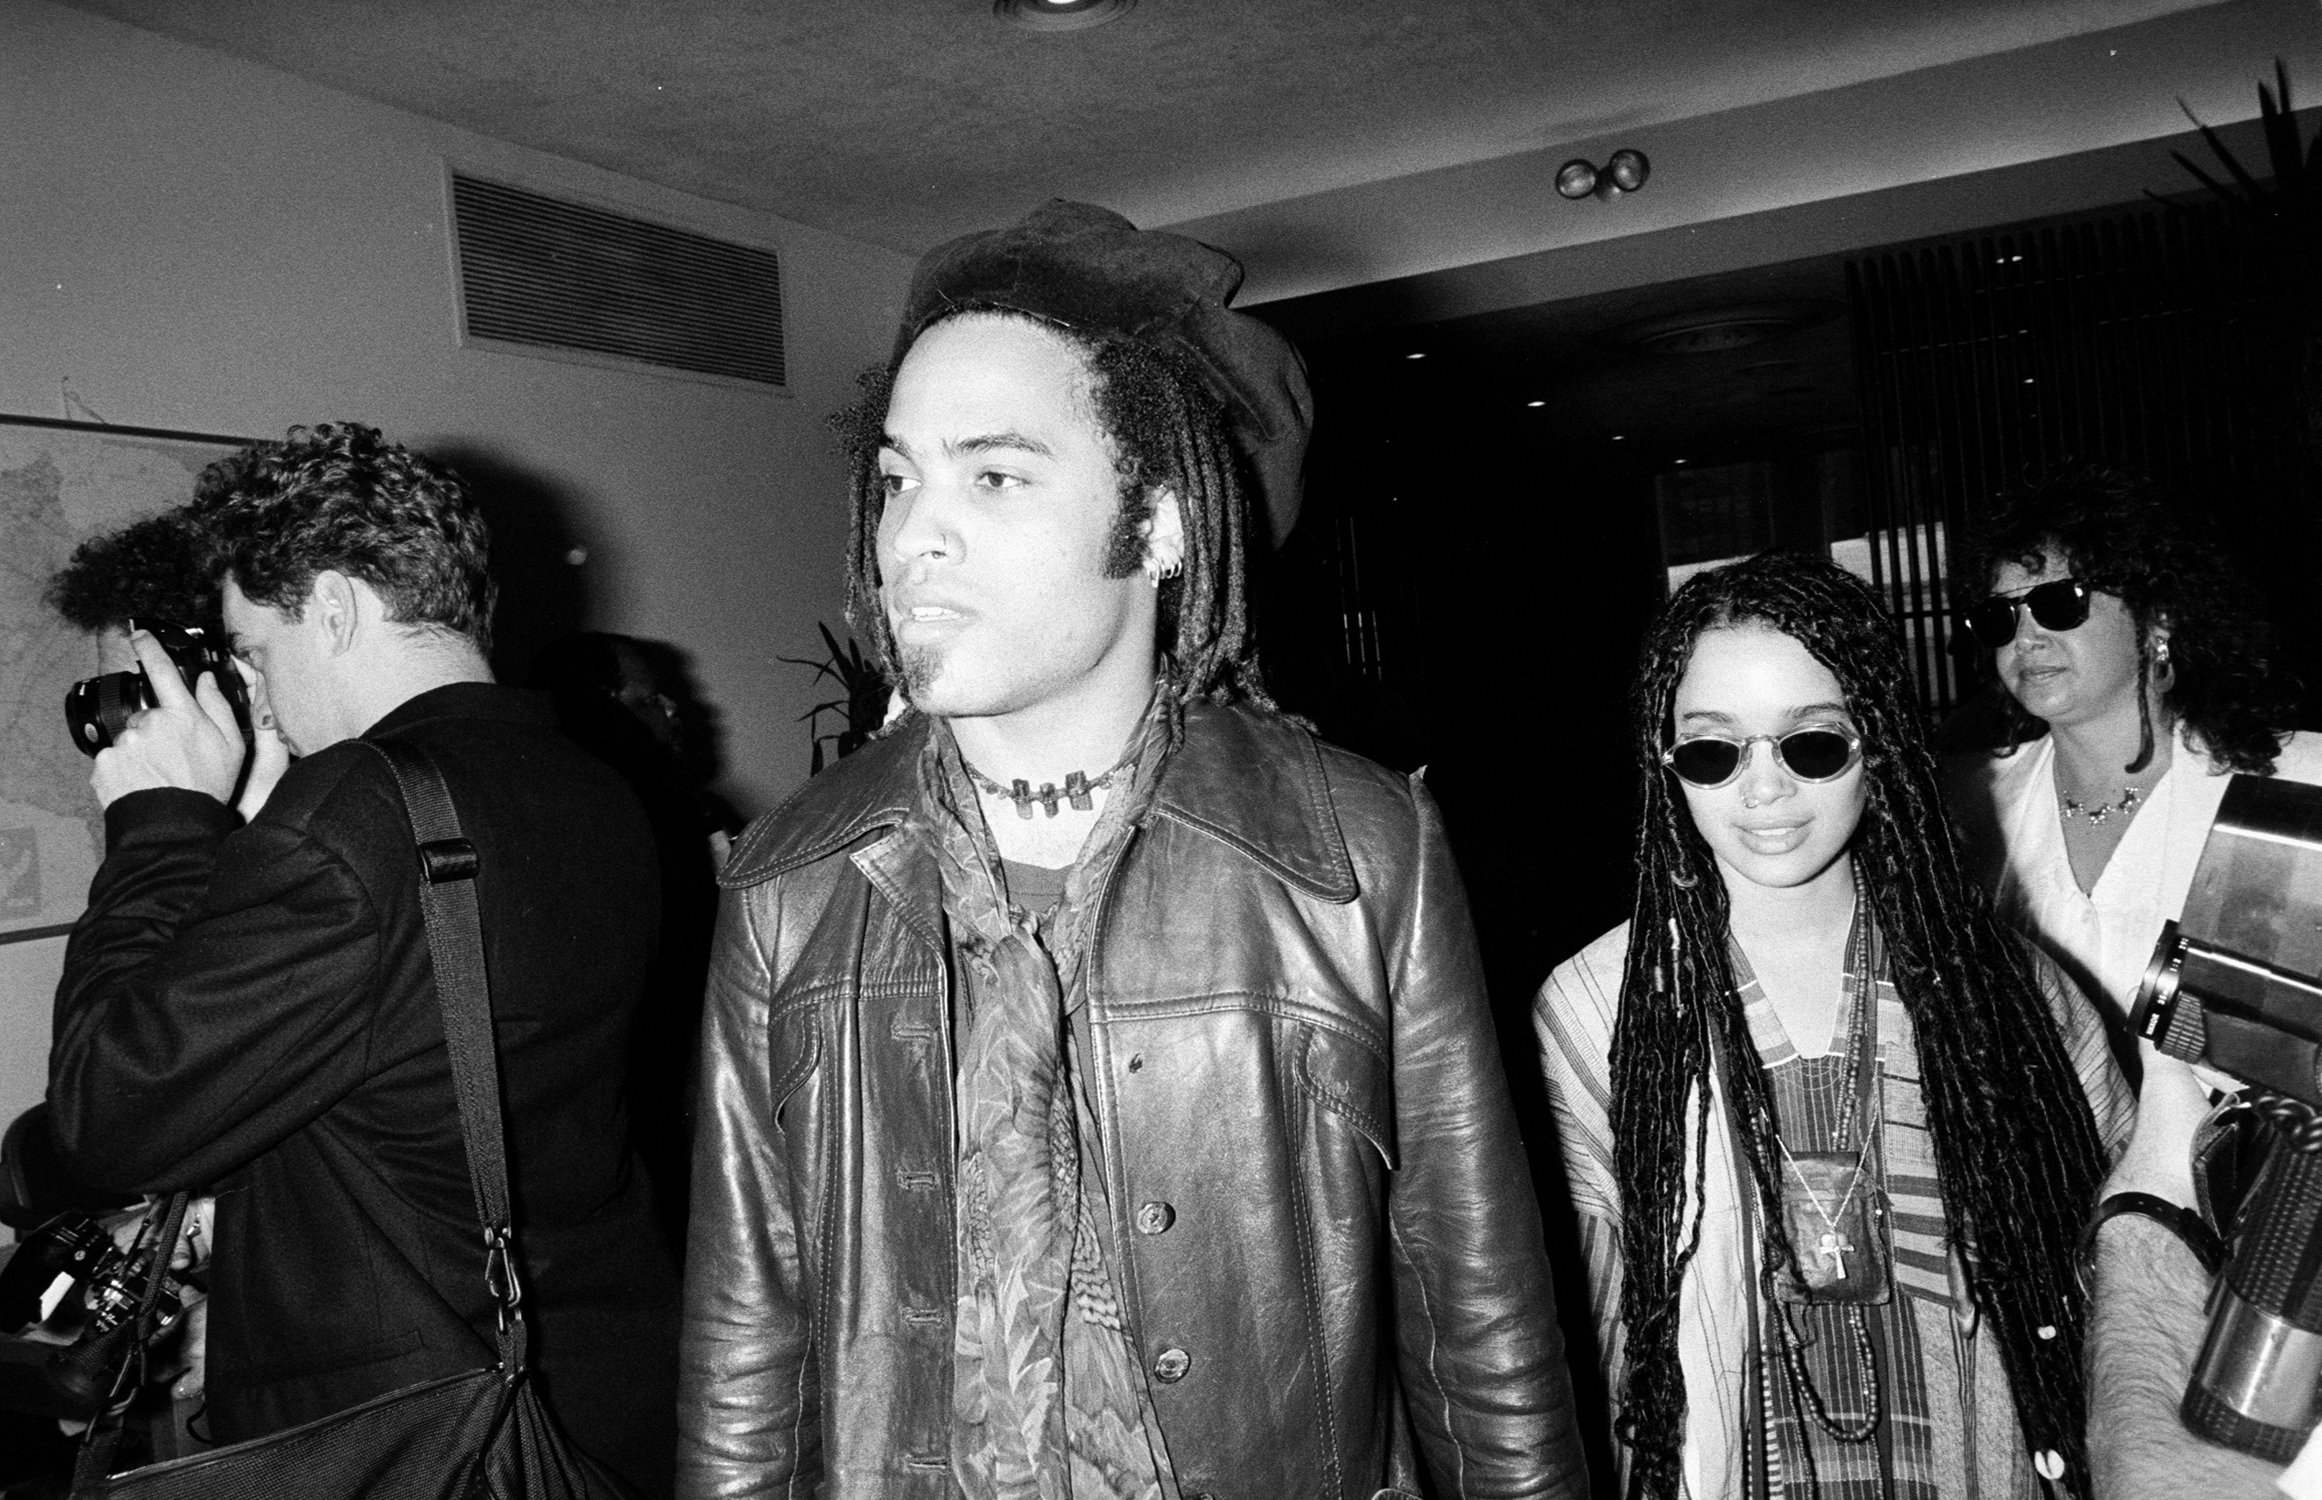 Lenny Kravitz and Lisa Bonet |  The LIFE Picture Collection via Getty Images